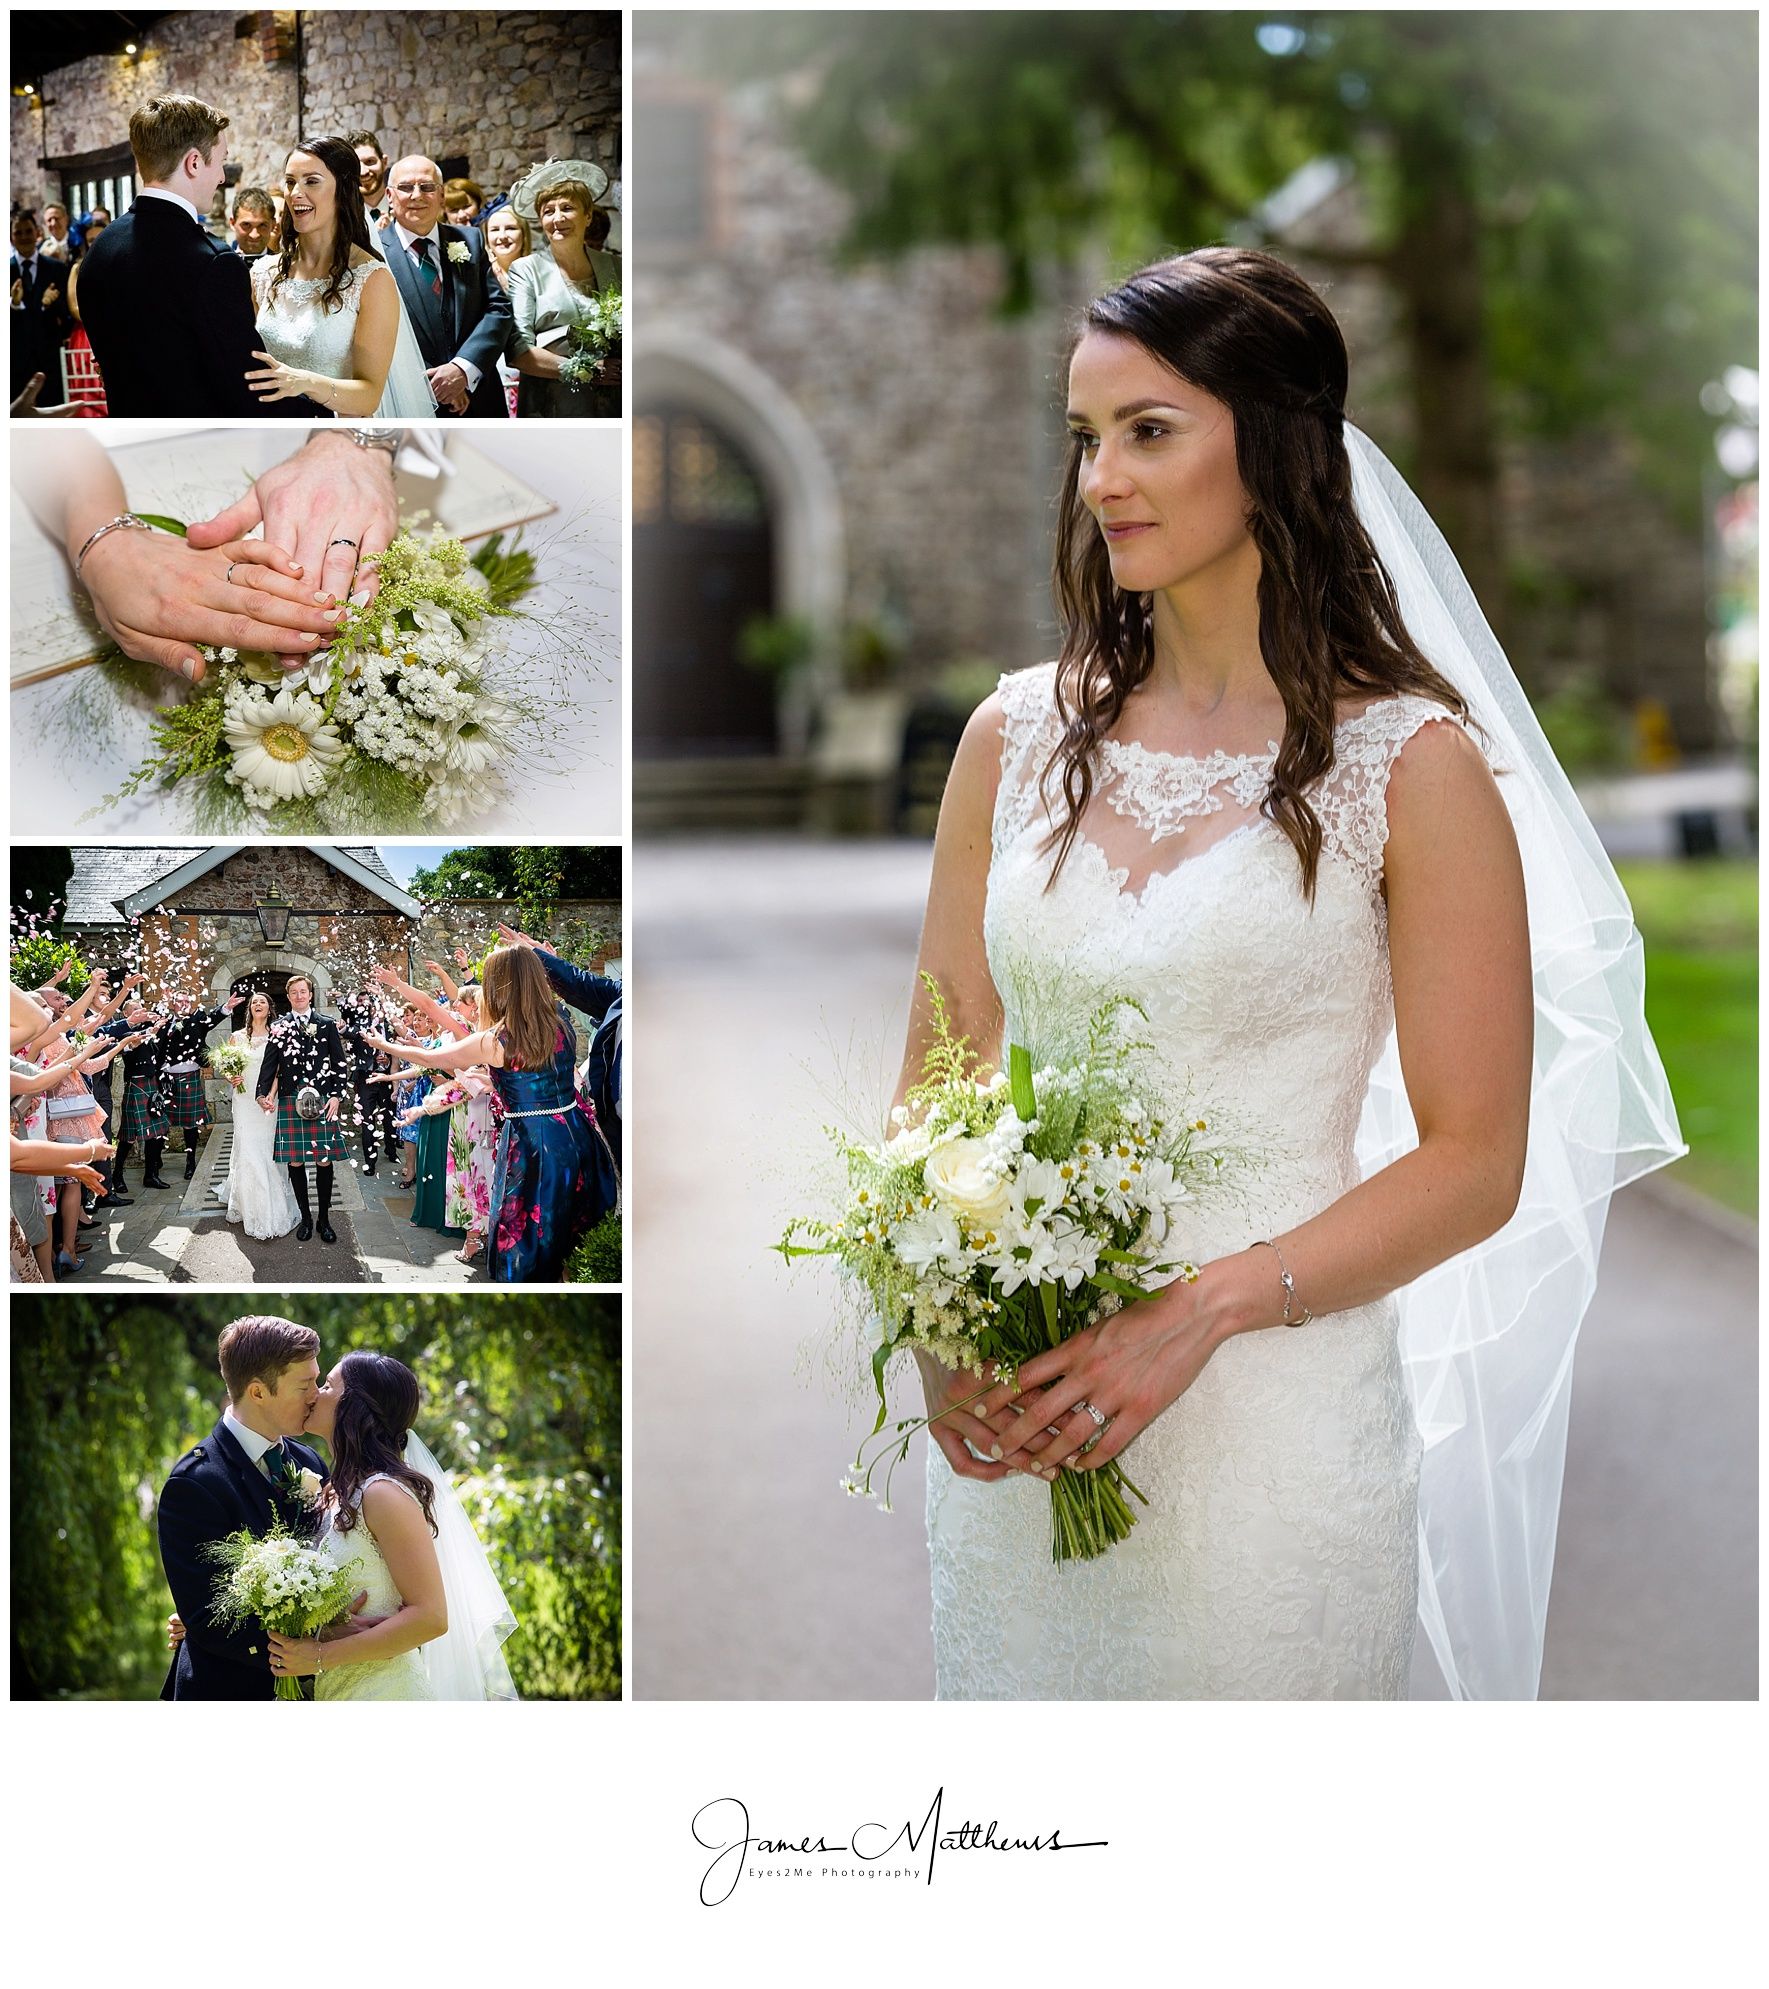 Creative Wedding Photographer with Story Telling approach based in Caerphilly near Cardiff South Wales